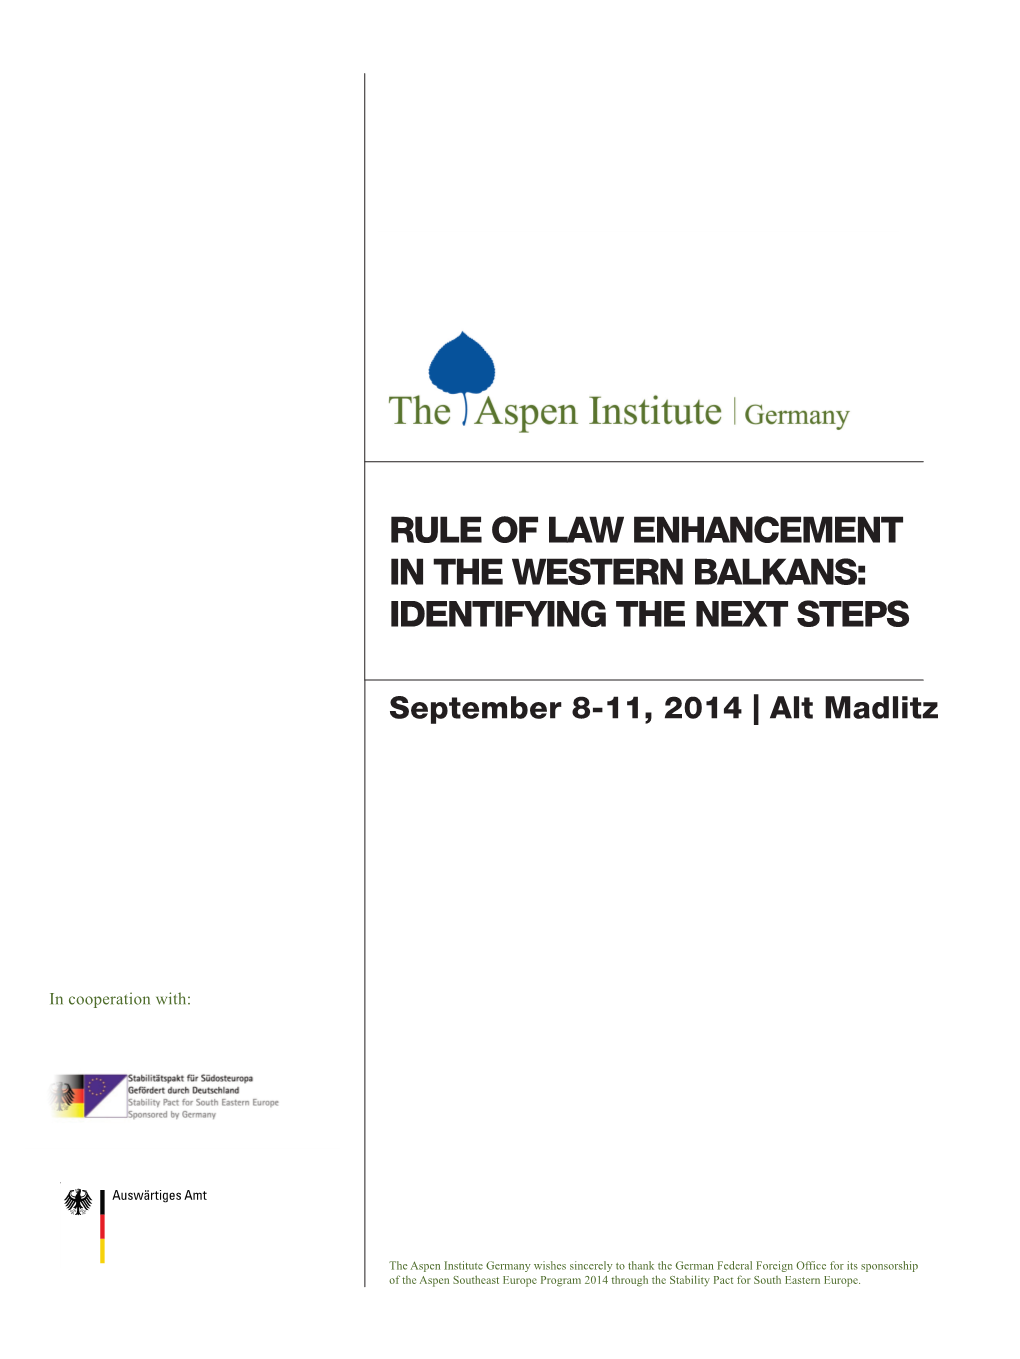 Rule of Law Enhancement in the Western Balkans: Identifying the Next Steps